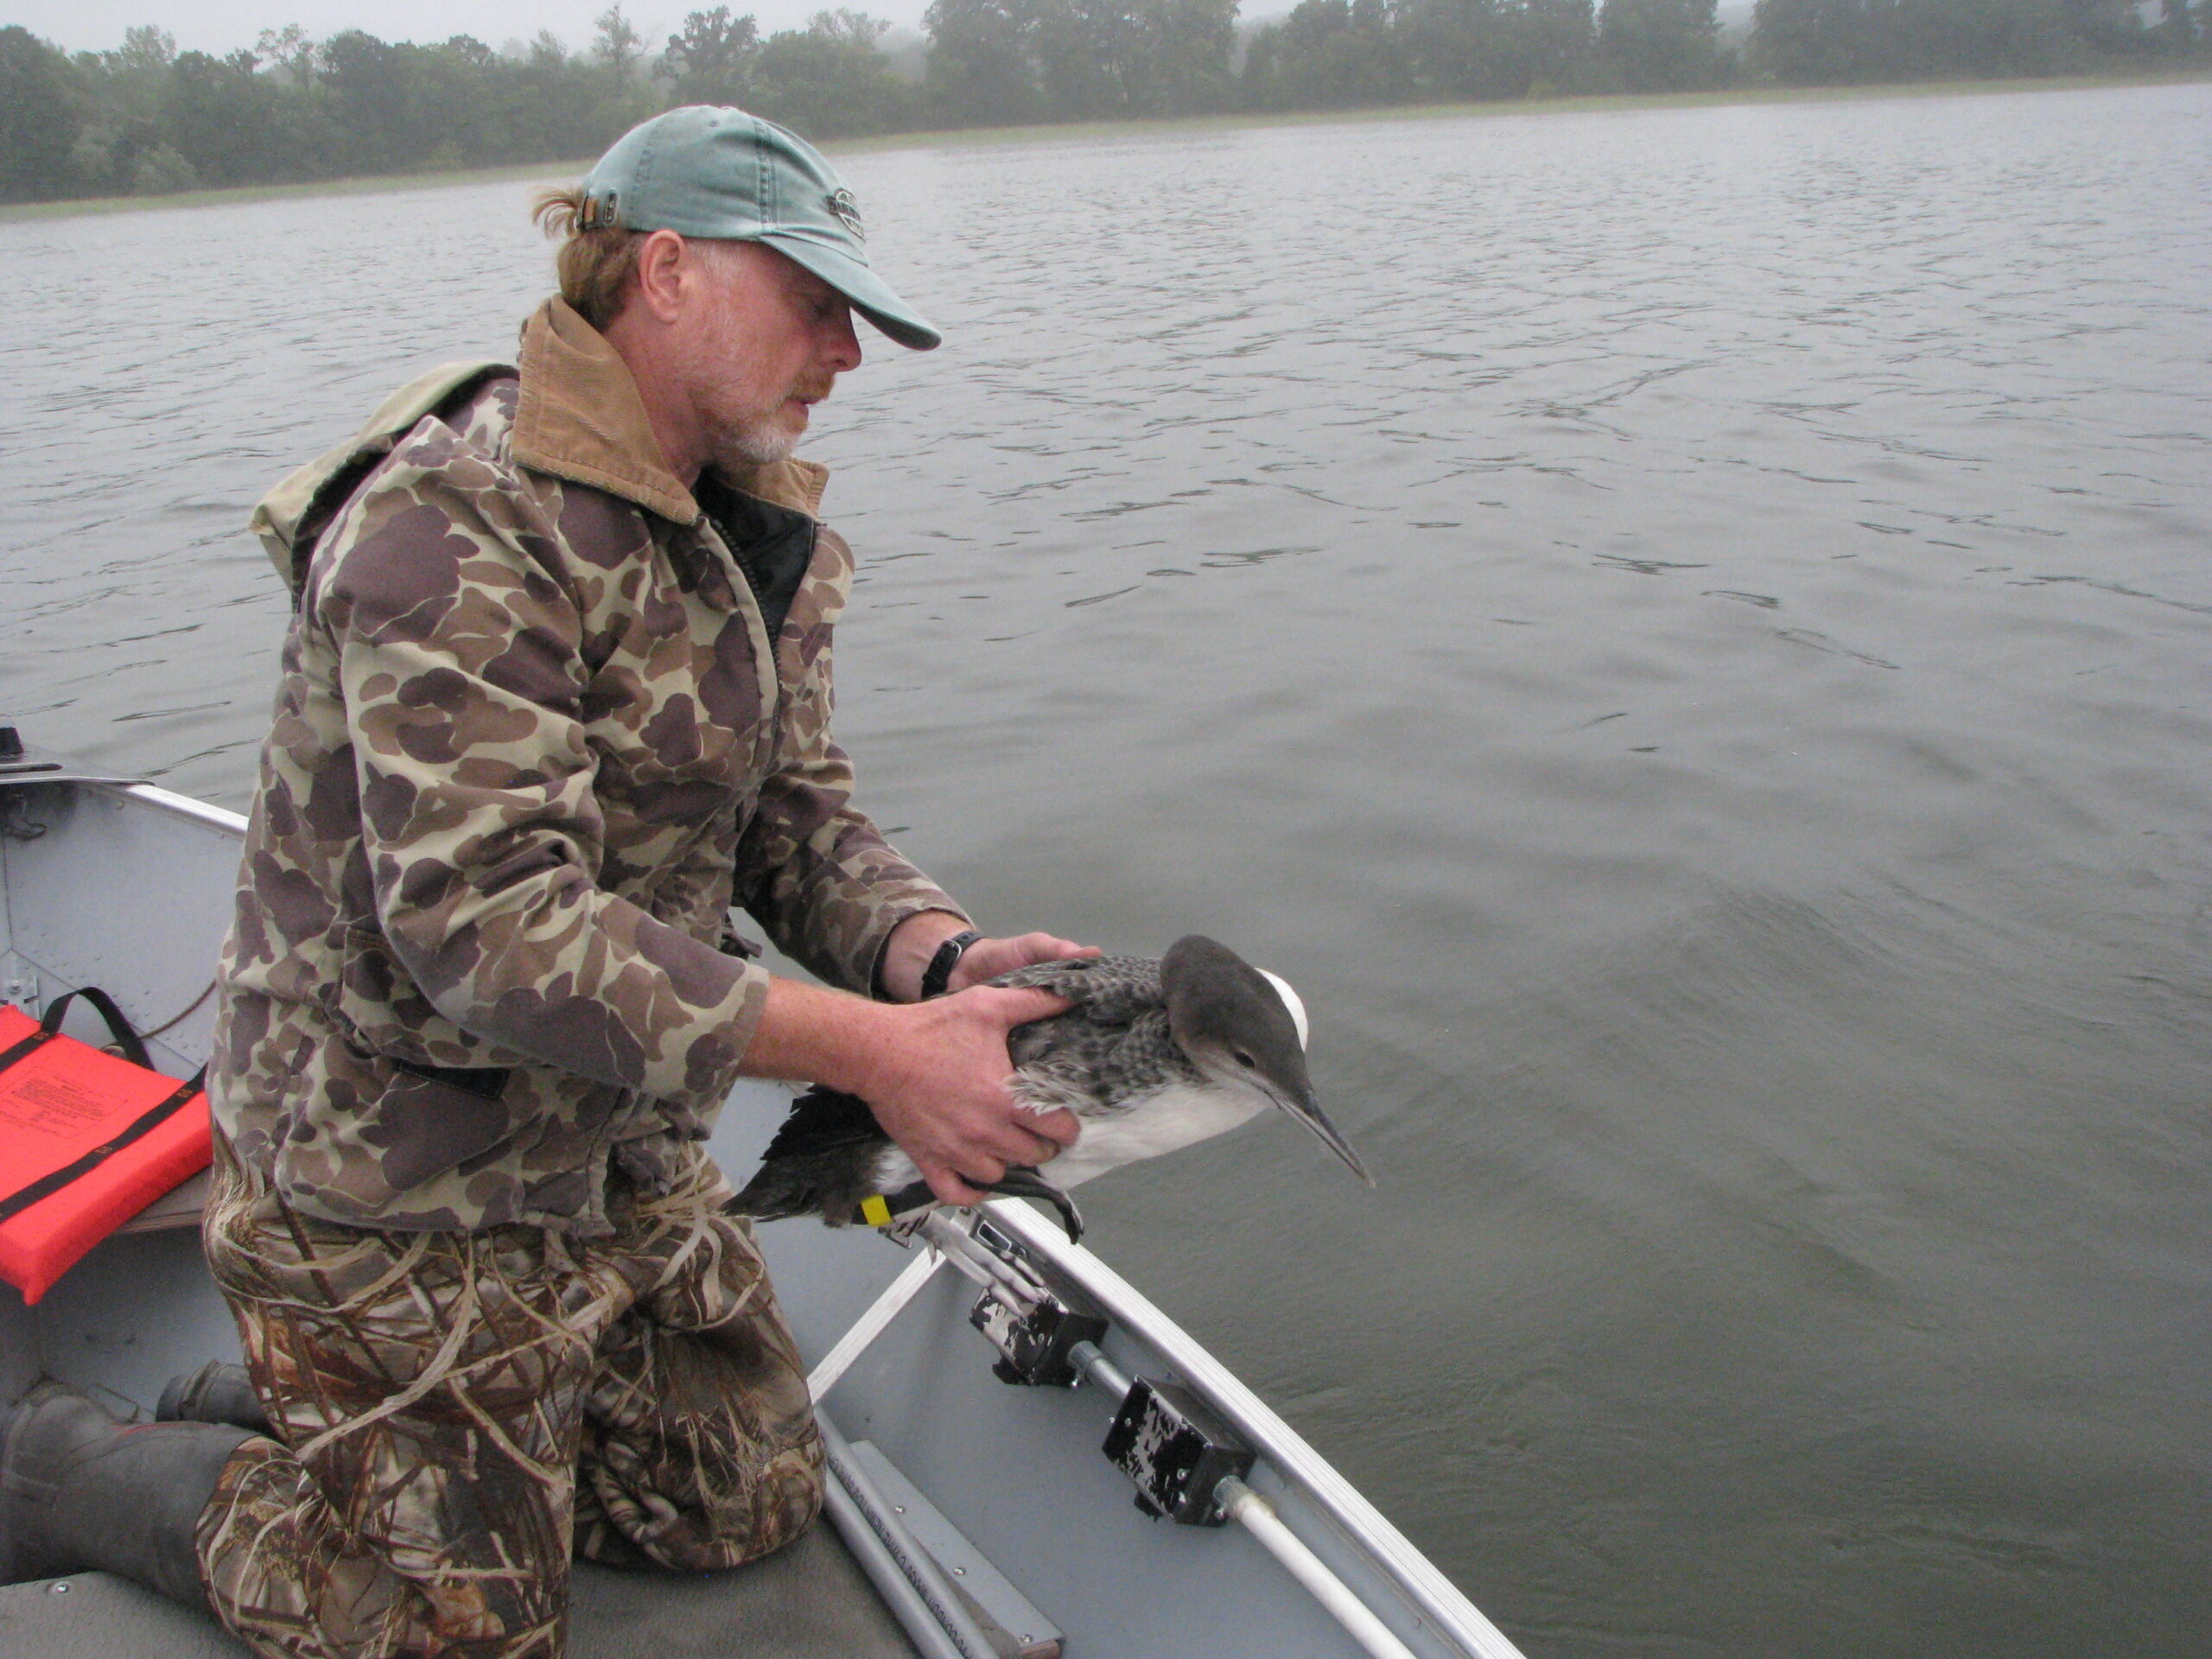 Researchers Studying Effects Of BP Oil Spill On Wisconsin Loons Who Winter There